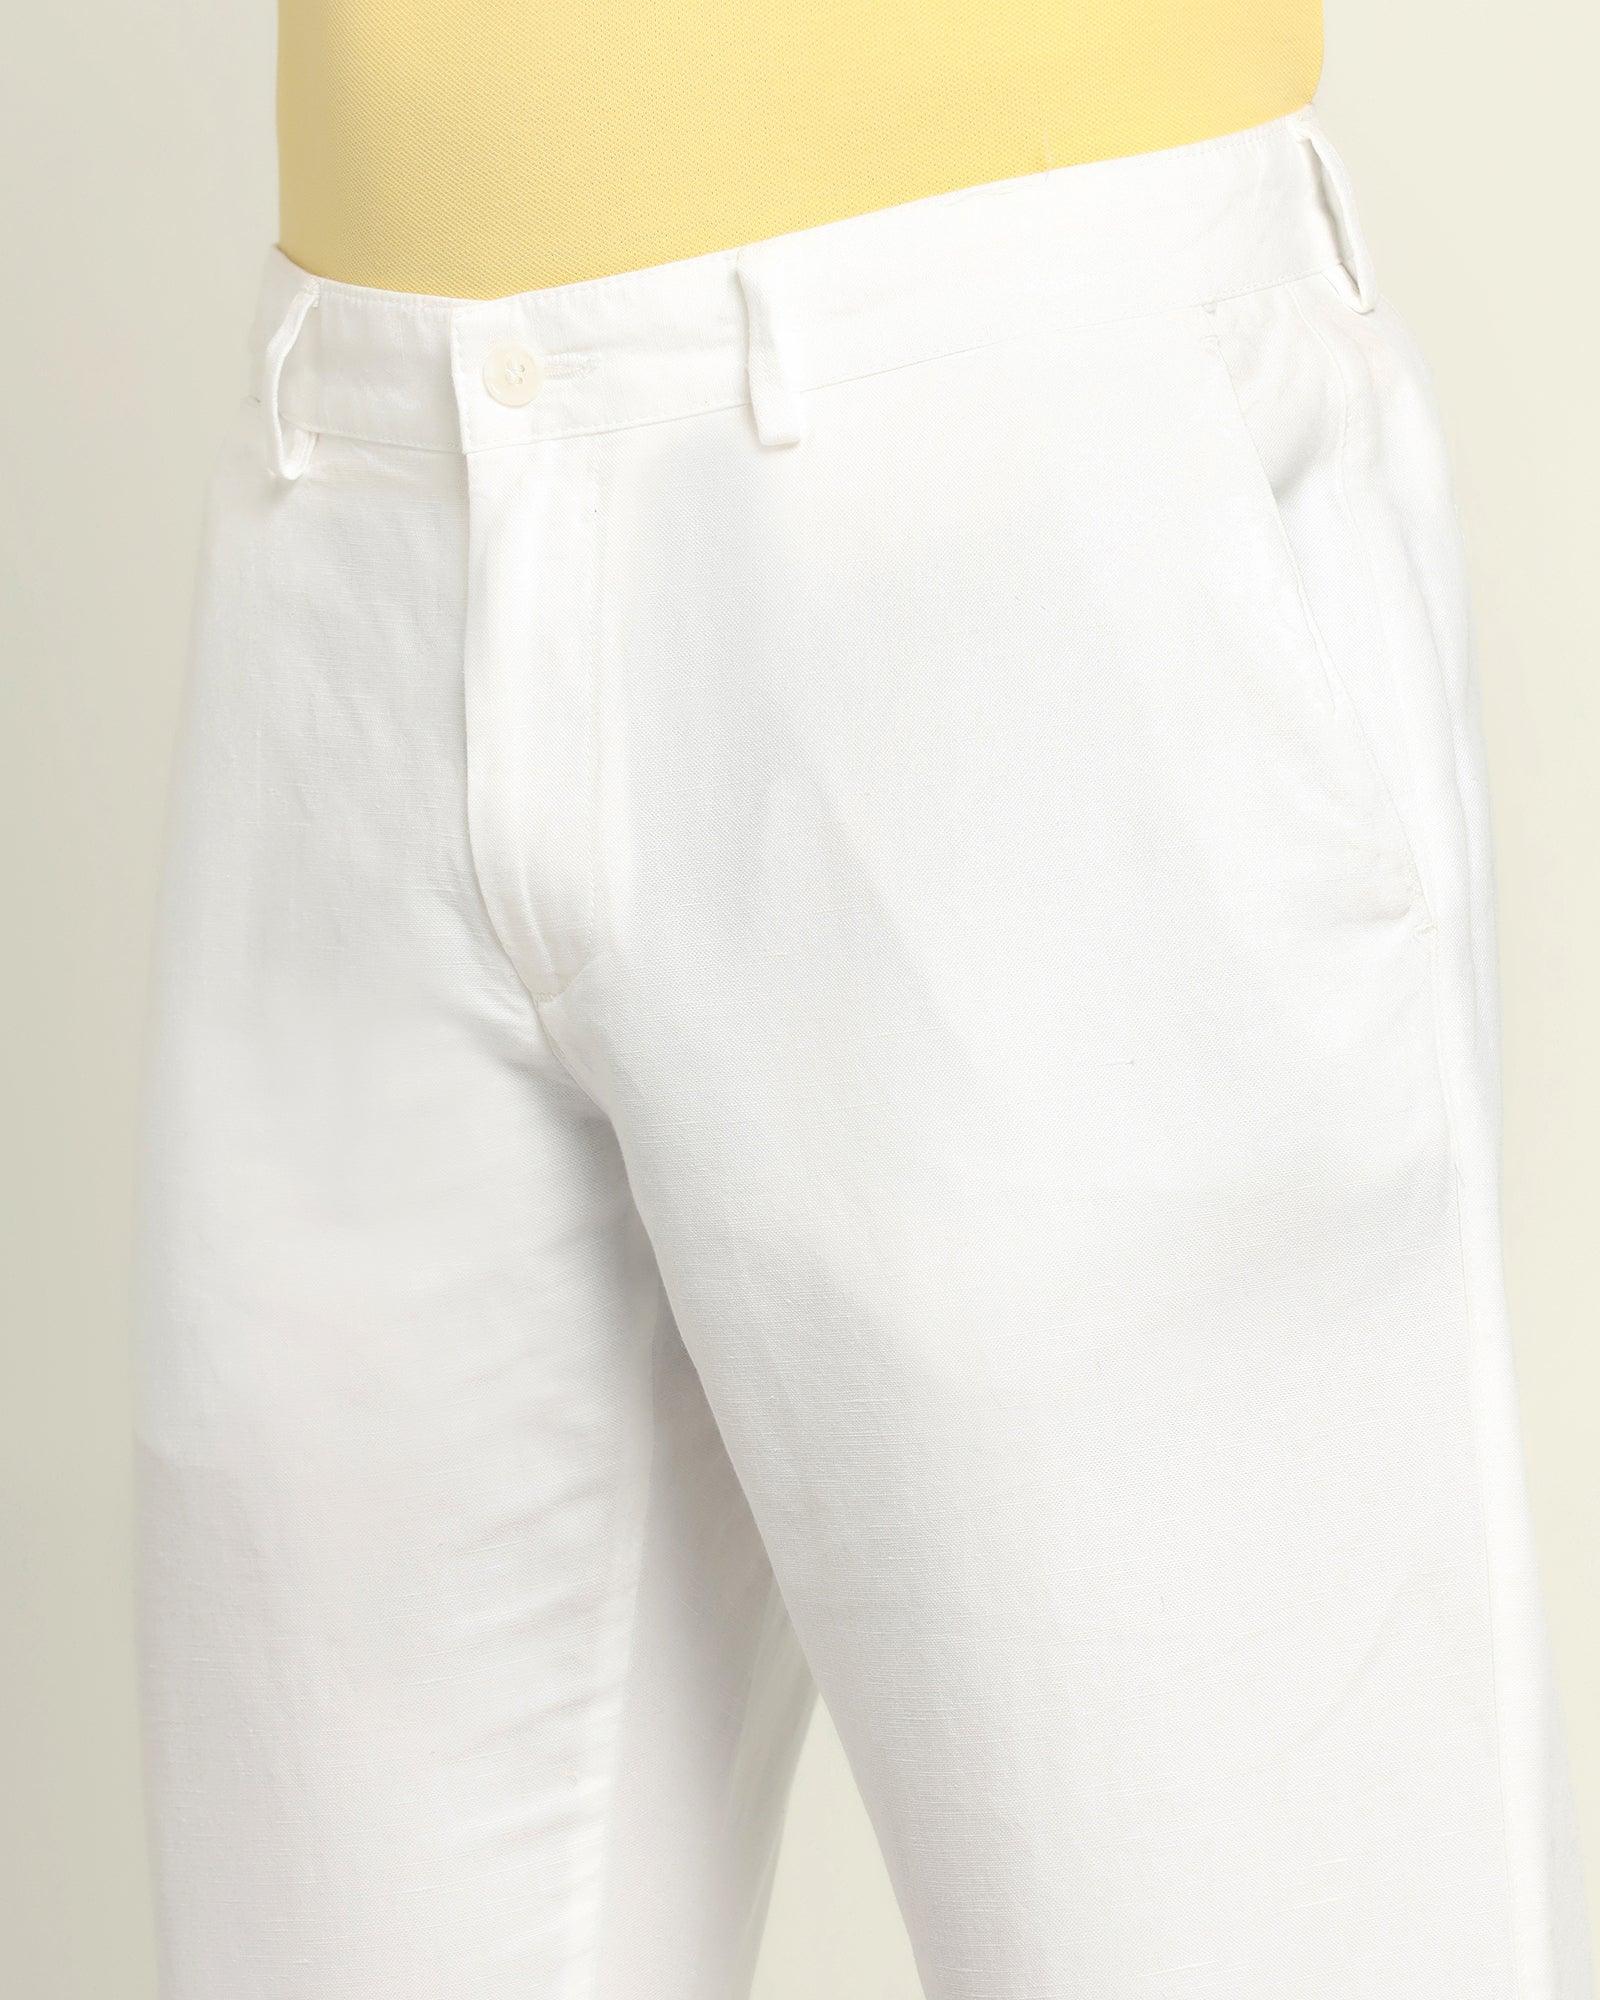 Linen Must Haves Slim Comfort B-95 Casual White Solid Khakis - Kinsley